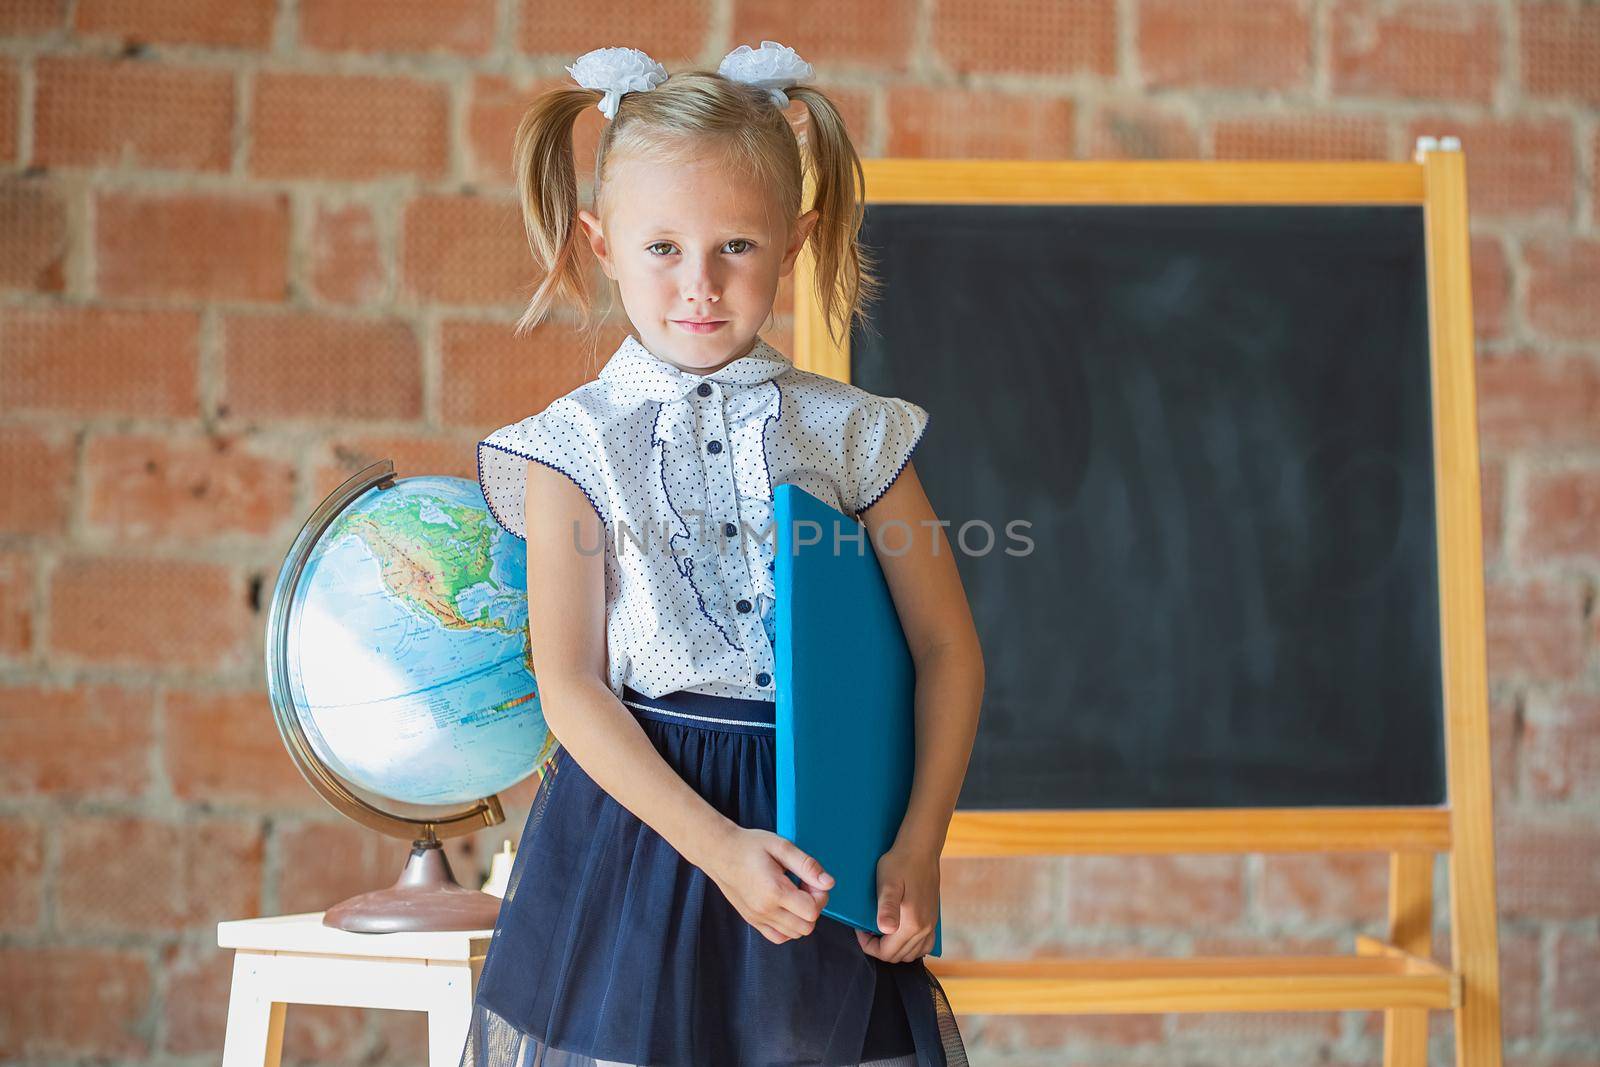 Unhappy little girl in school uniform with a book in her hands, back to school concept